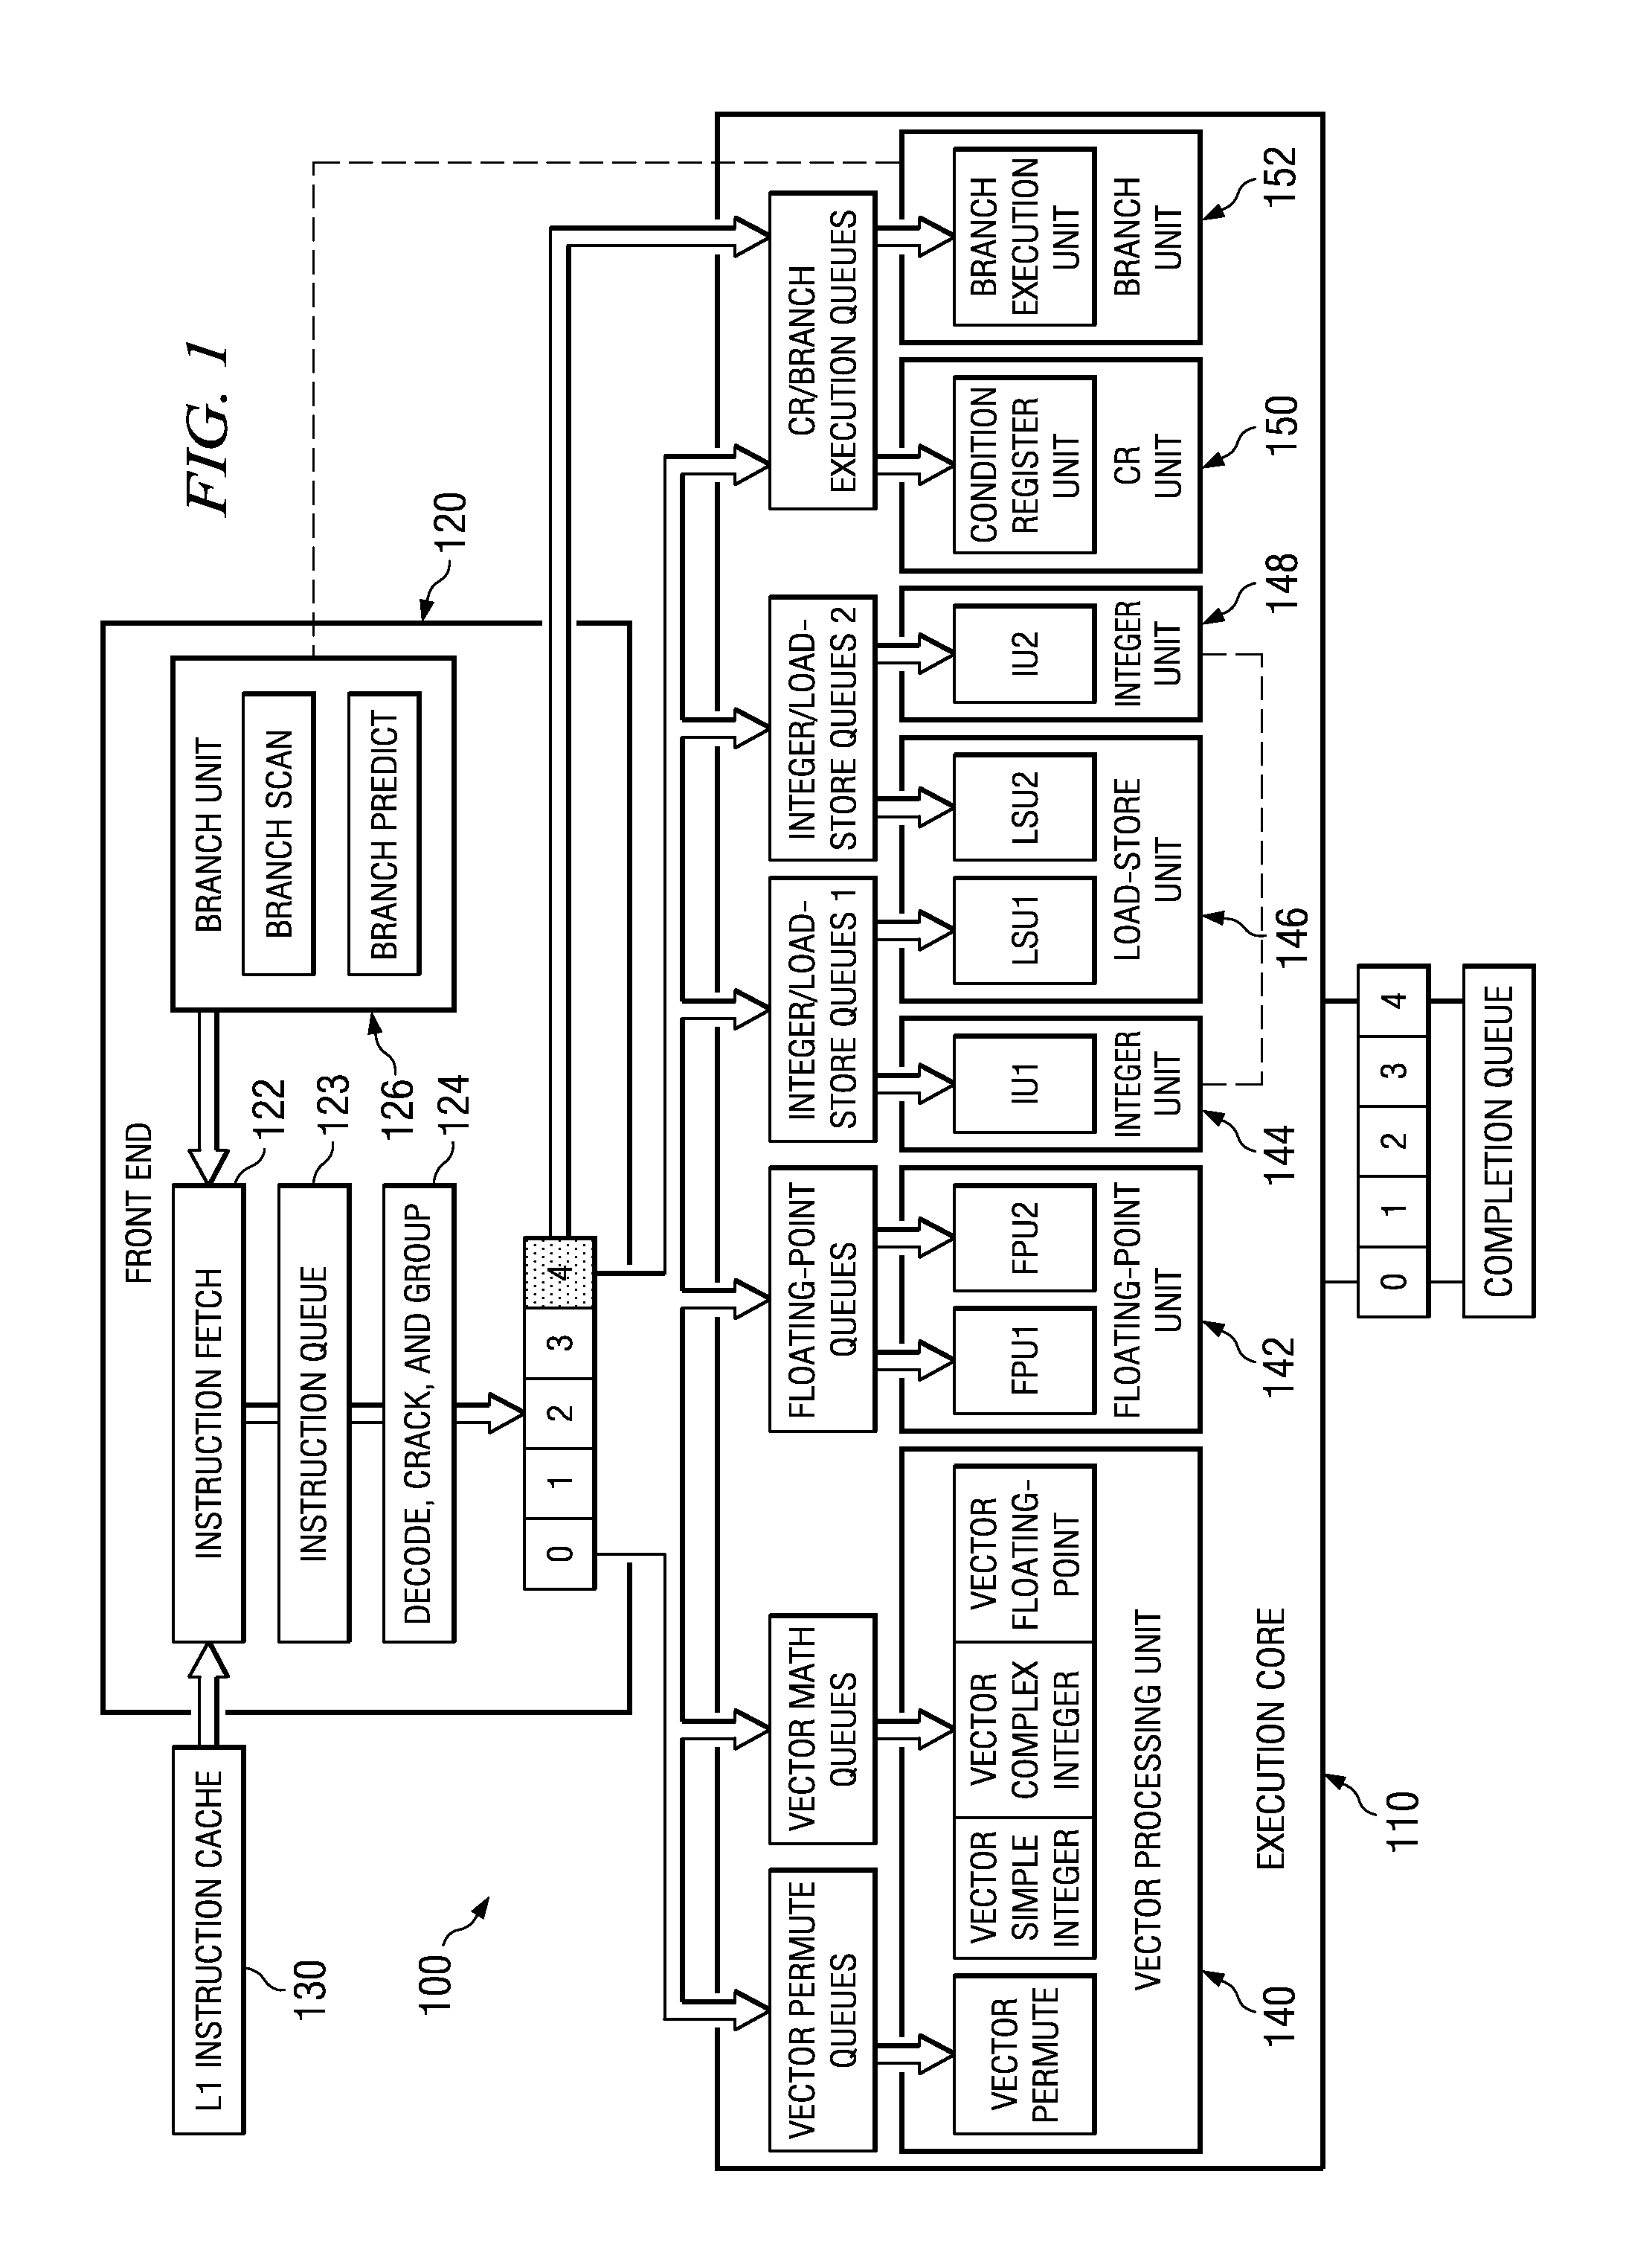 System and Method for Compiling Scalar Code for a Single Instruction Multiple Data (SIMD) Execution Engine